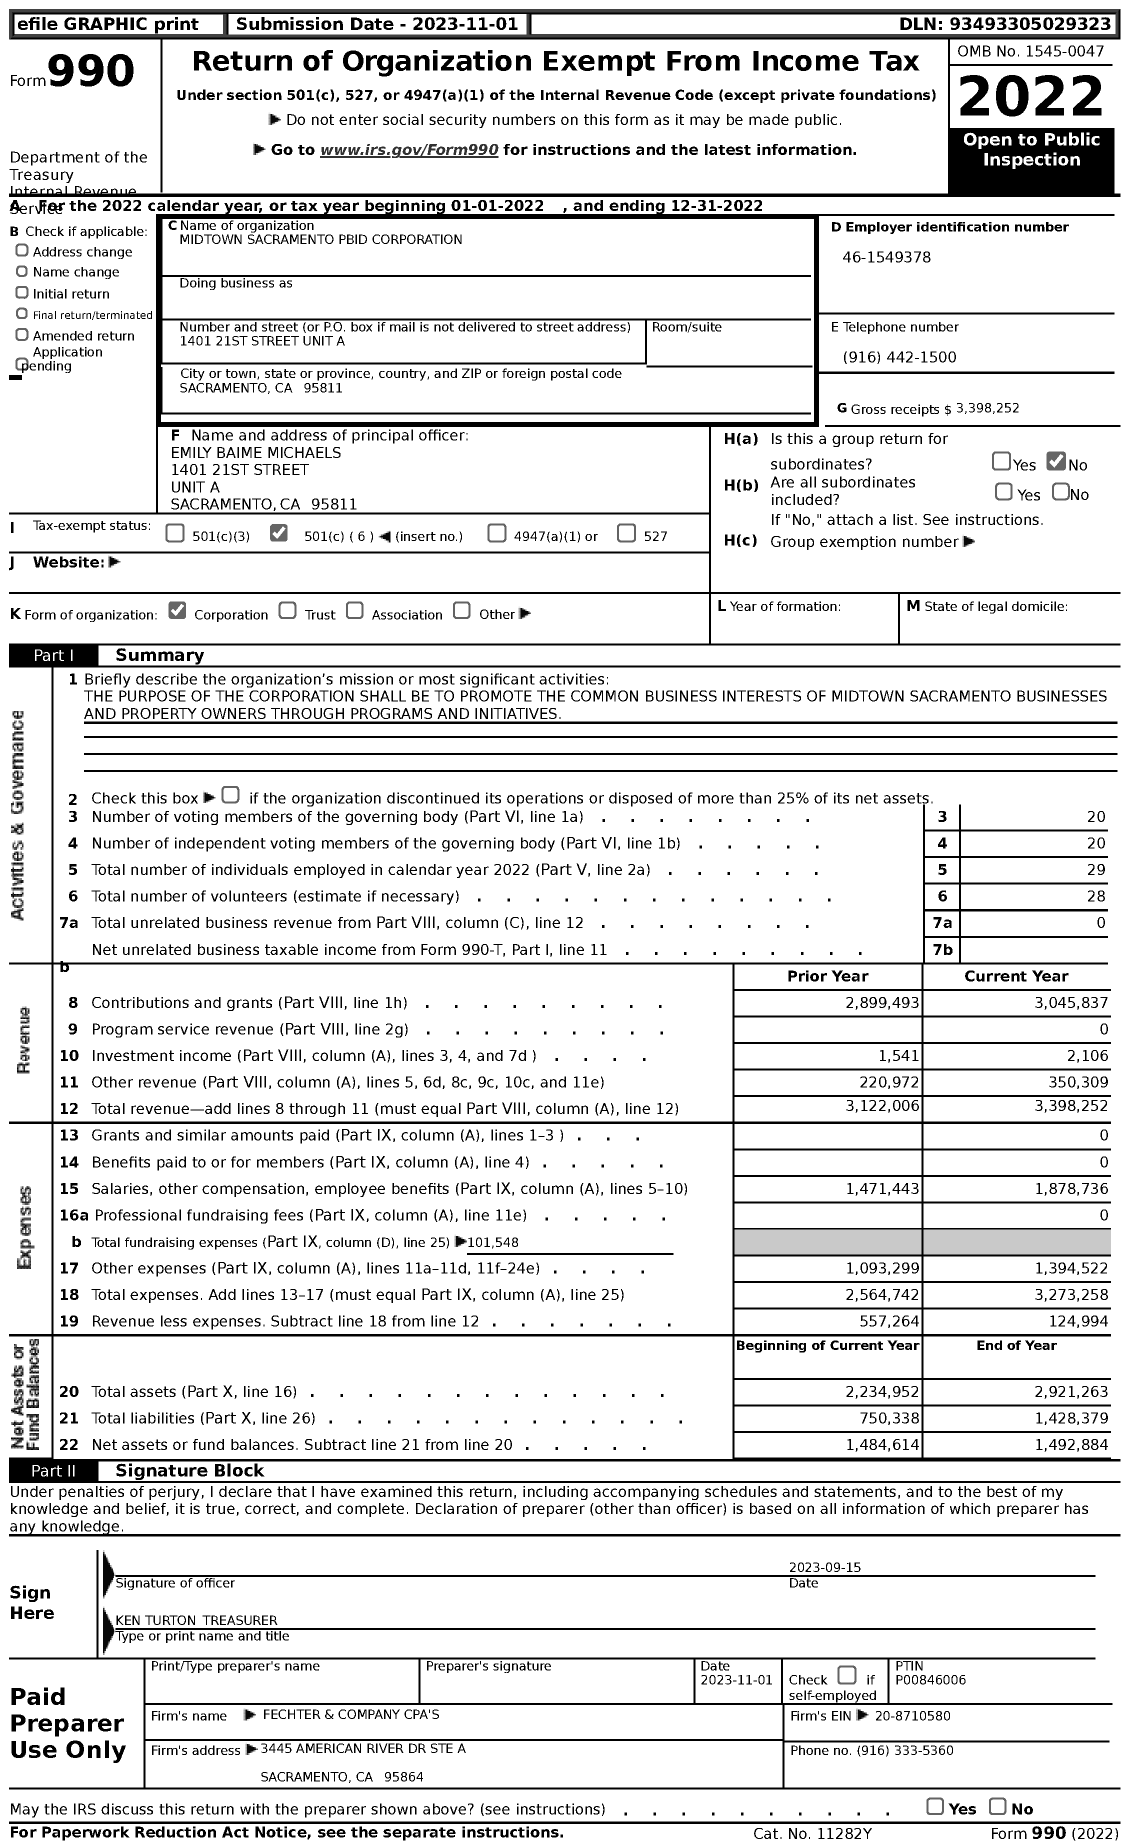 Image of first page of 2022 Form 990 for Midtown Sacramento PBID Corporation